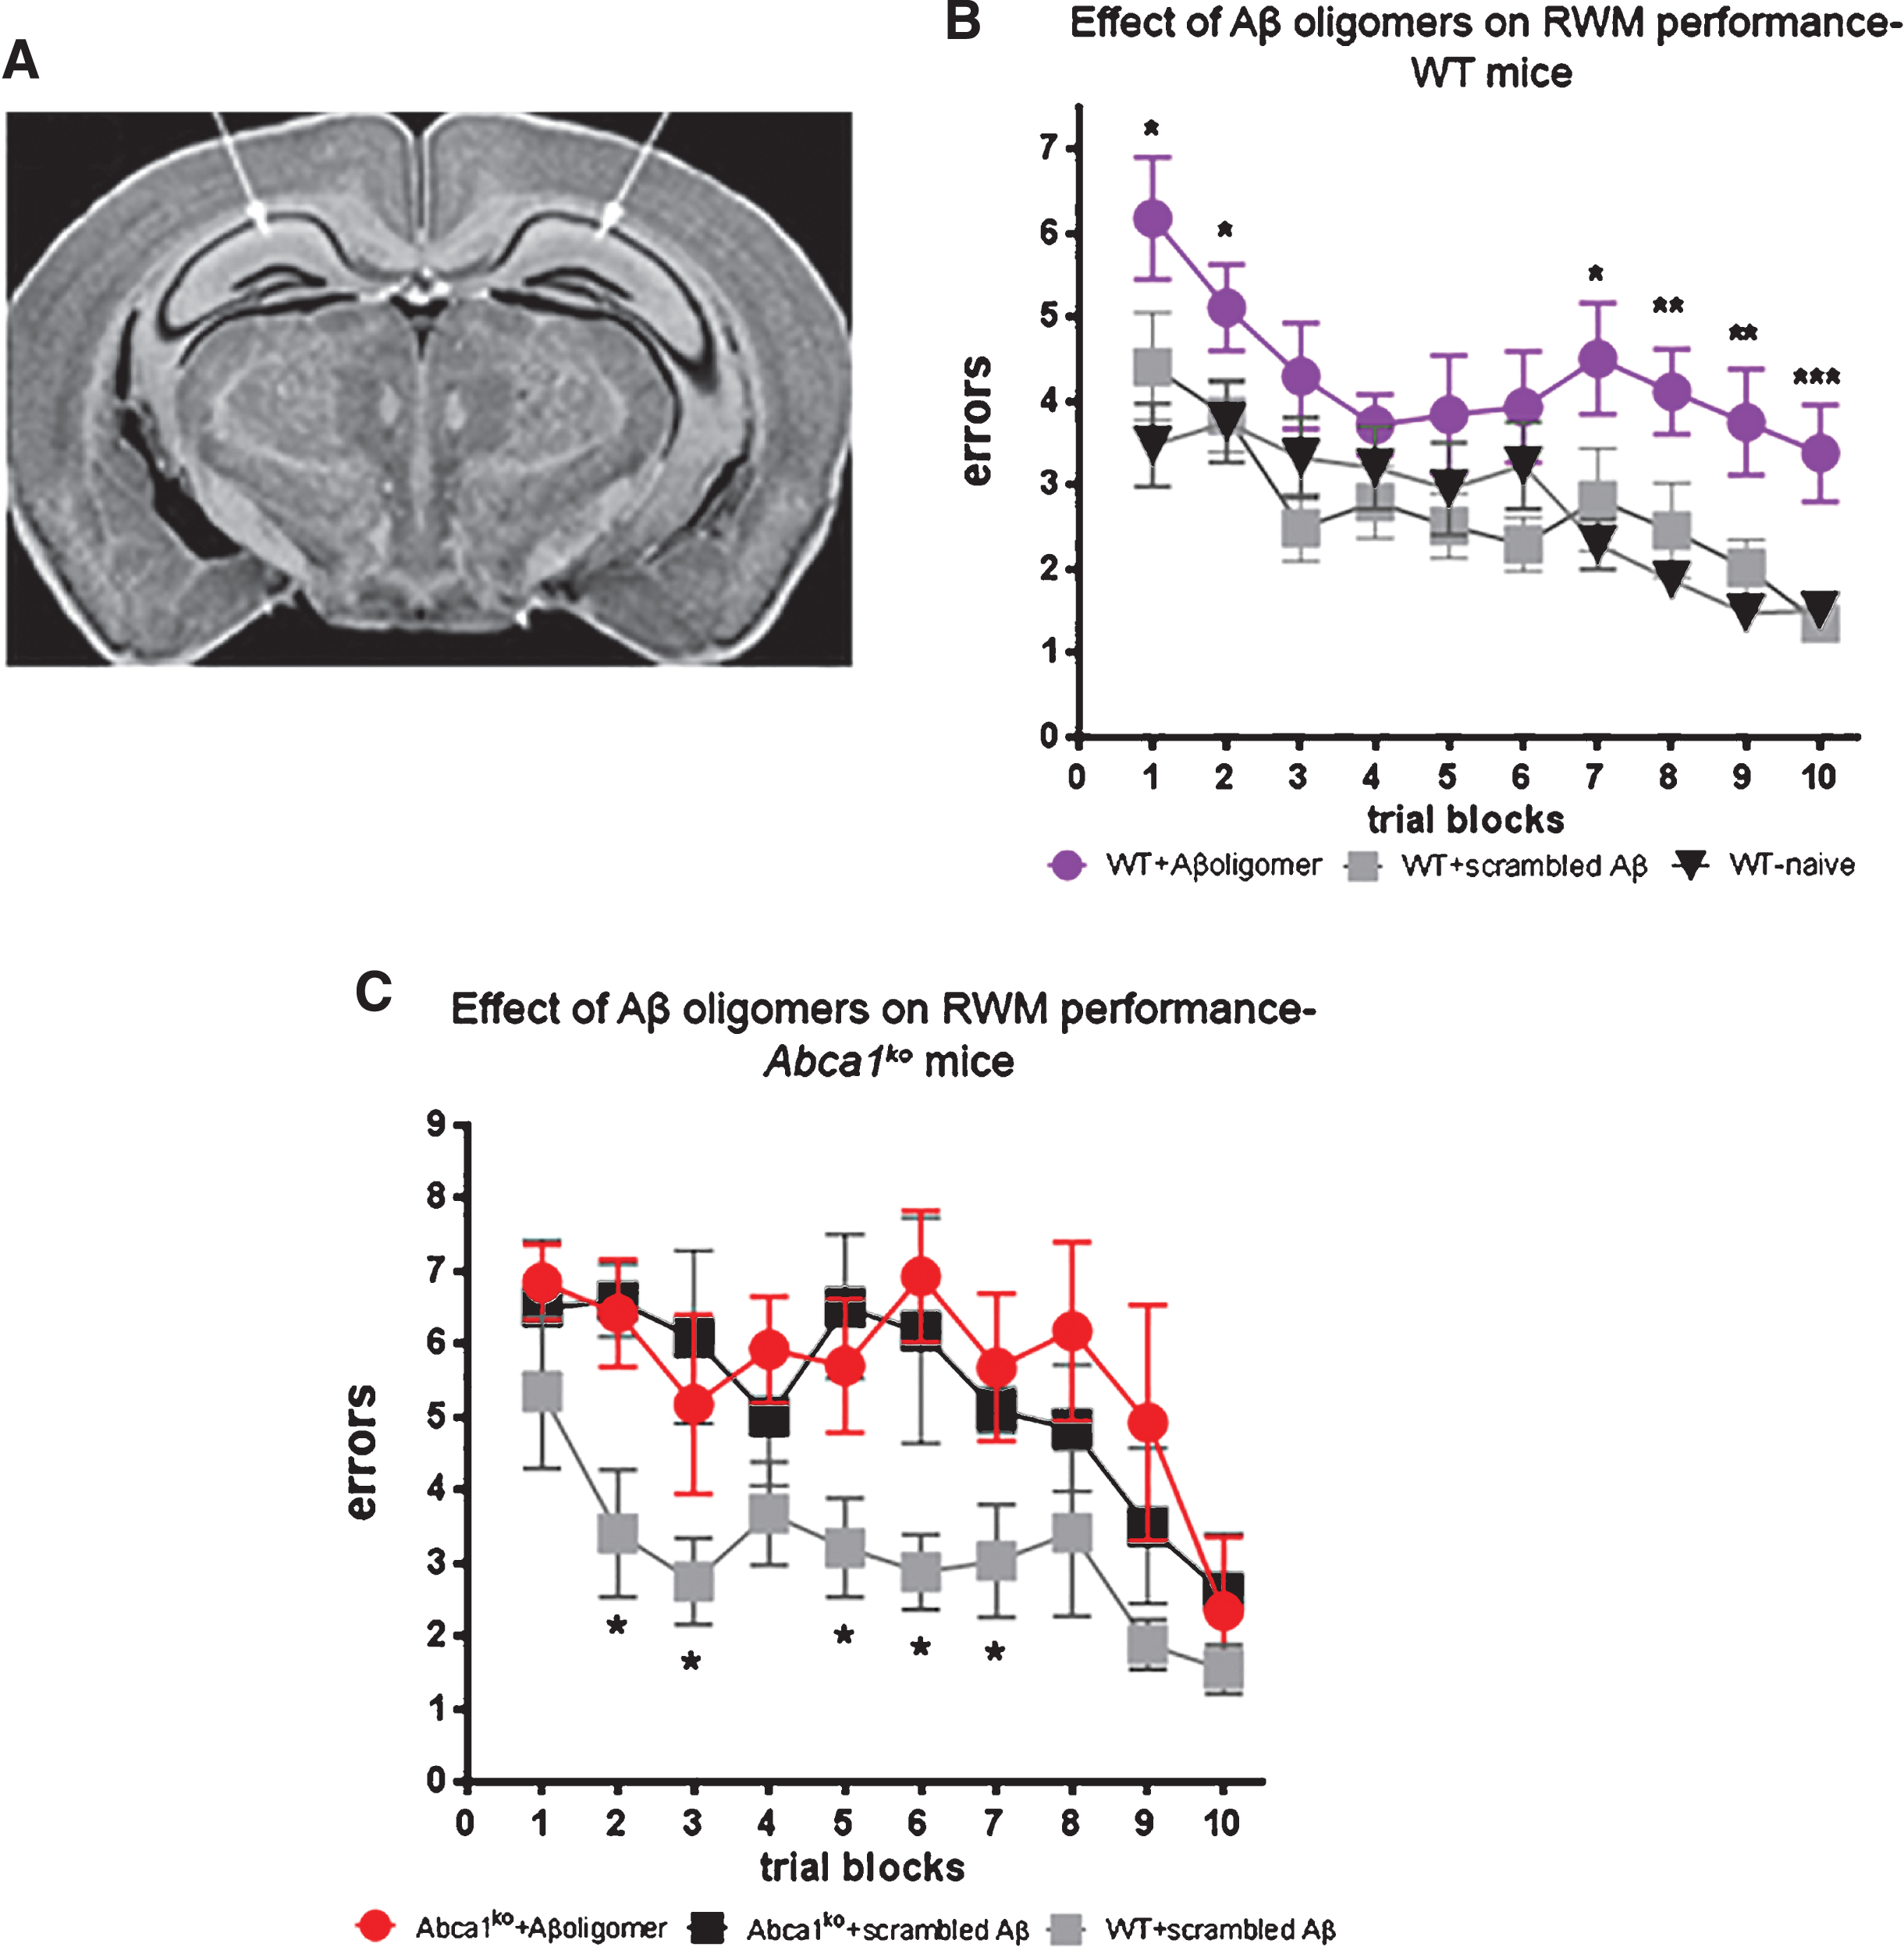 Infusion of Aβ oligomers into the hippocampus differentially affects cognitive performance in WT and Abca1ko mice. Aβ42 oligomers (characterized on Fig. 2) were infused into the hippocampus of 7-month-old WT or Abca1ko mice and cognitive performance was evaluated by Radial arm water maze (RWM) paradigm. Control mice were infused with scrambled Aβ. As additional control, we used WT naïve mice without surgery. A) Represents the location of cannulas implanted into the hippocampus. B) Cognitive performance of WT mice is significantly affected by Aβ42 oligomers but not by scrambled Aβ. Analysis by two-way repeated measures ANOVA shows no interaction between training and treatment; however there was a significant main effect of treatment (Aβ42 oligomers); F(2,279) = 17.84, p < 0.0001 and trial block (trial block); F(9,279) = 7.99, p < 0.0001. Post-test for multiple comparisons demonstrates the difference between mice infused with Aβ42 oligomers and scrambled Aβ (compare purple circles to grey squares): ***p < 0.001; **p < 0.01; *p < 0.05. n = 11 –12 mice per group. C) There is a significant difference in RWM performance between WT and Abca1ko mice infused with scrambled Aβ. In contrast there is no significant difference in RWM performance between Abca1ko mice infused with Aβ42 oligomers and scrambled Aβ. Analysis by two-way repeated measures ANOVA shows no interaction between training and treatment; but a significant main effect of treatment; F(2,90) = 5.56, p = 0.0238 and training F(9,90) = 6.29, p < 0.0001. Post-test for multiple comparisons demonstrates the difference between WT and Abca1ko mice infused with scrambled Aβ (compare black to grey squares): *p < 0.05. n = 4 –5 mice per group.